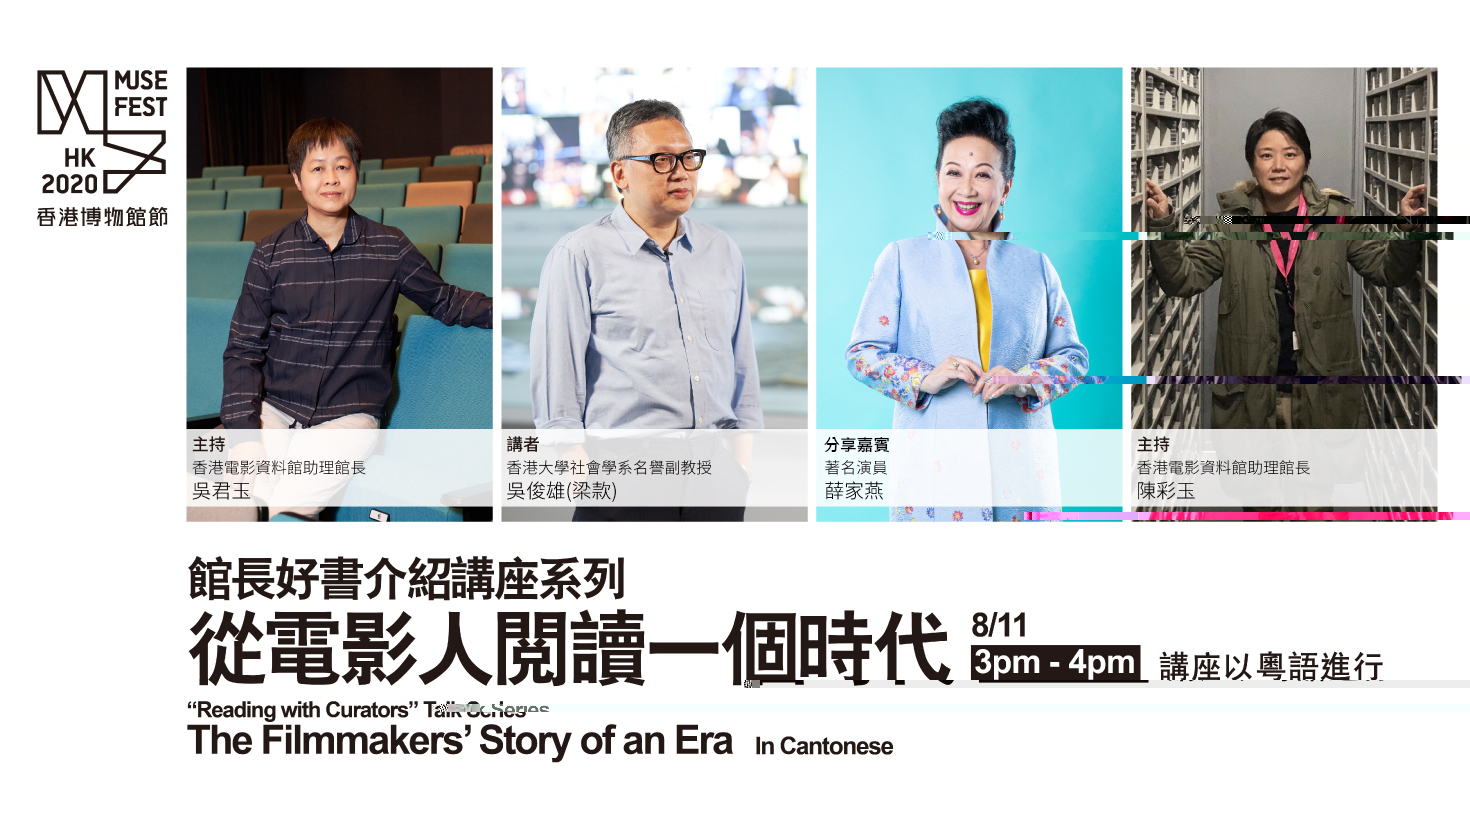 MUSE FEST HK 2020 "Reading with Curators Talk Series" ── The Filmmakers' Story of an Era